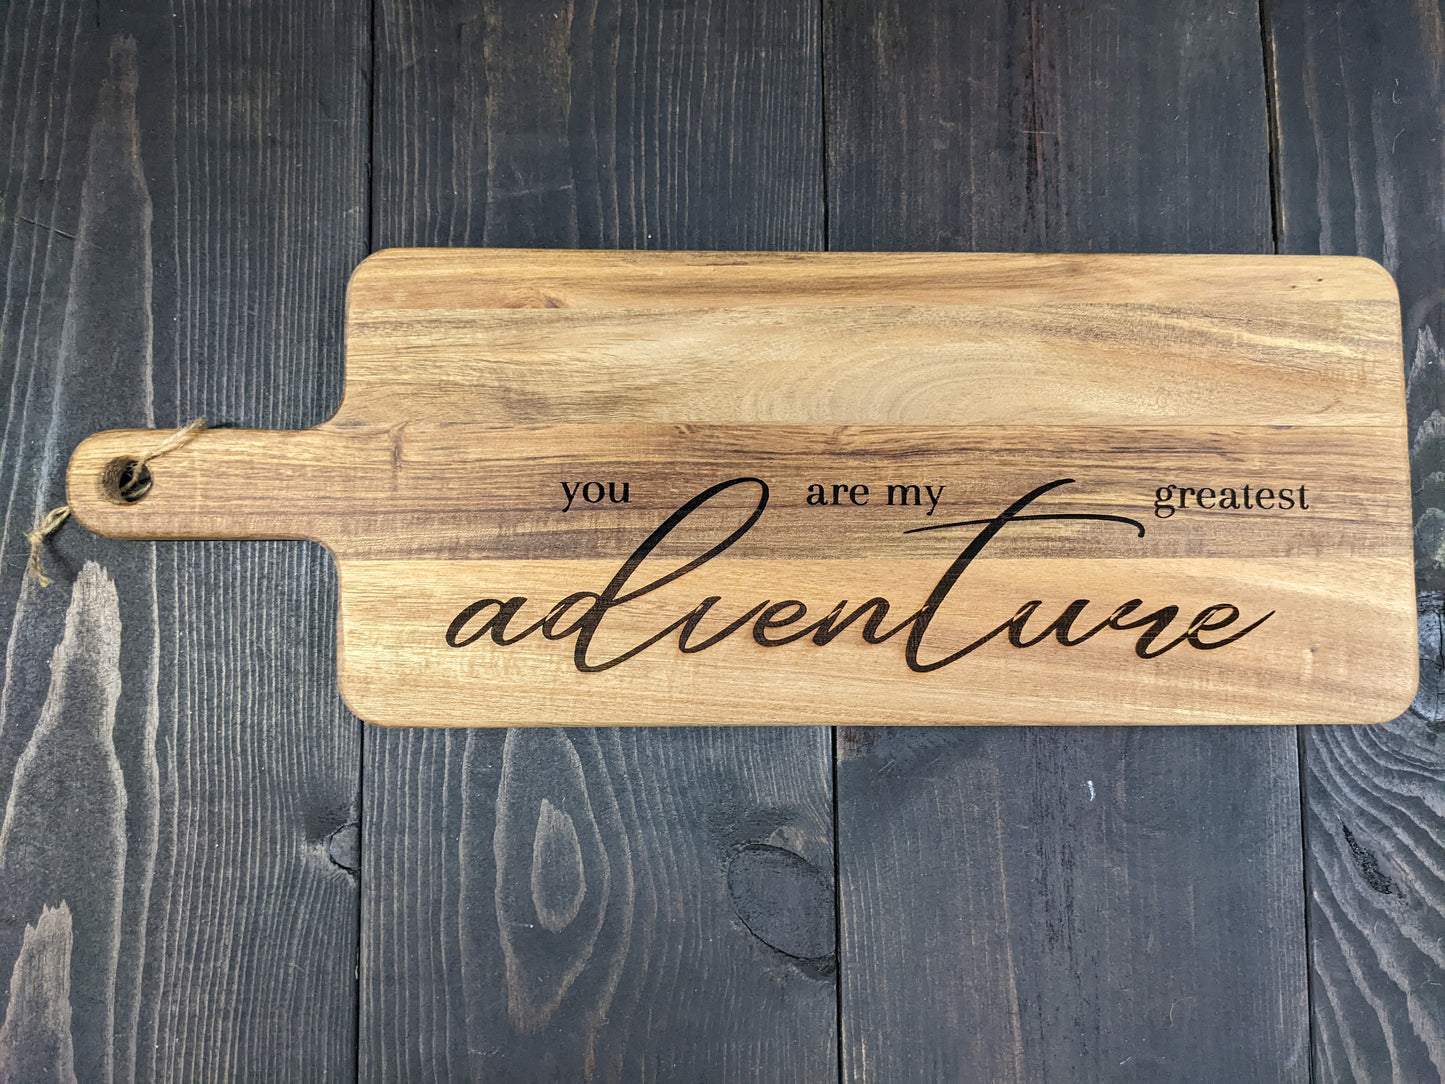 Cutting board- "You are my greatest adventure"